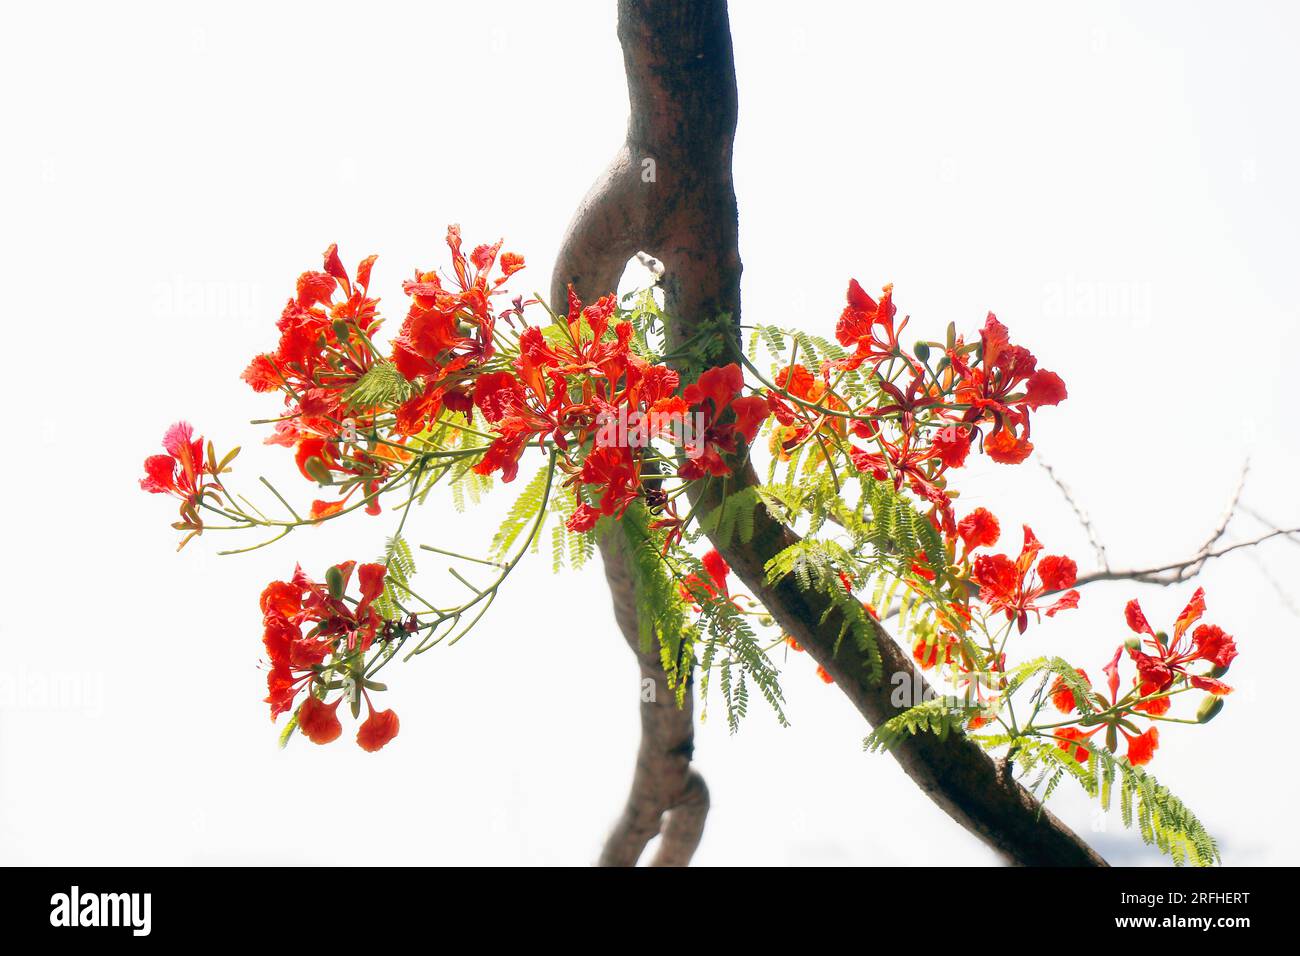 Delonix regia is a species of flowering plant in the bean family Fabaceae, also known as royal poinciana, flamboyant, phoenix flower, flame of the for Stock Photo